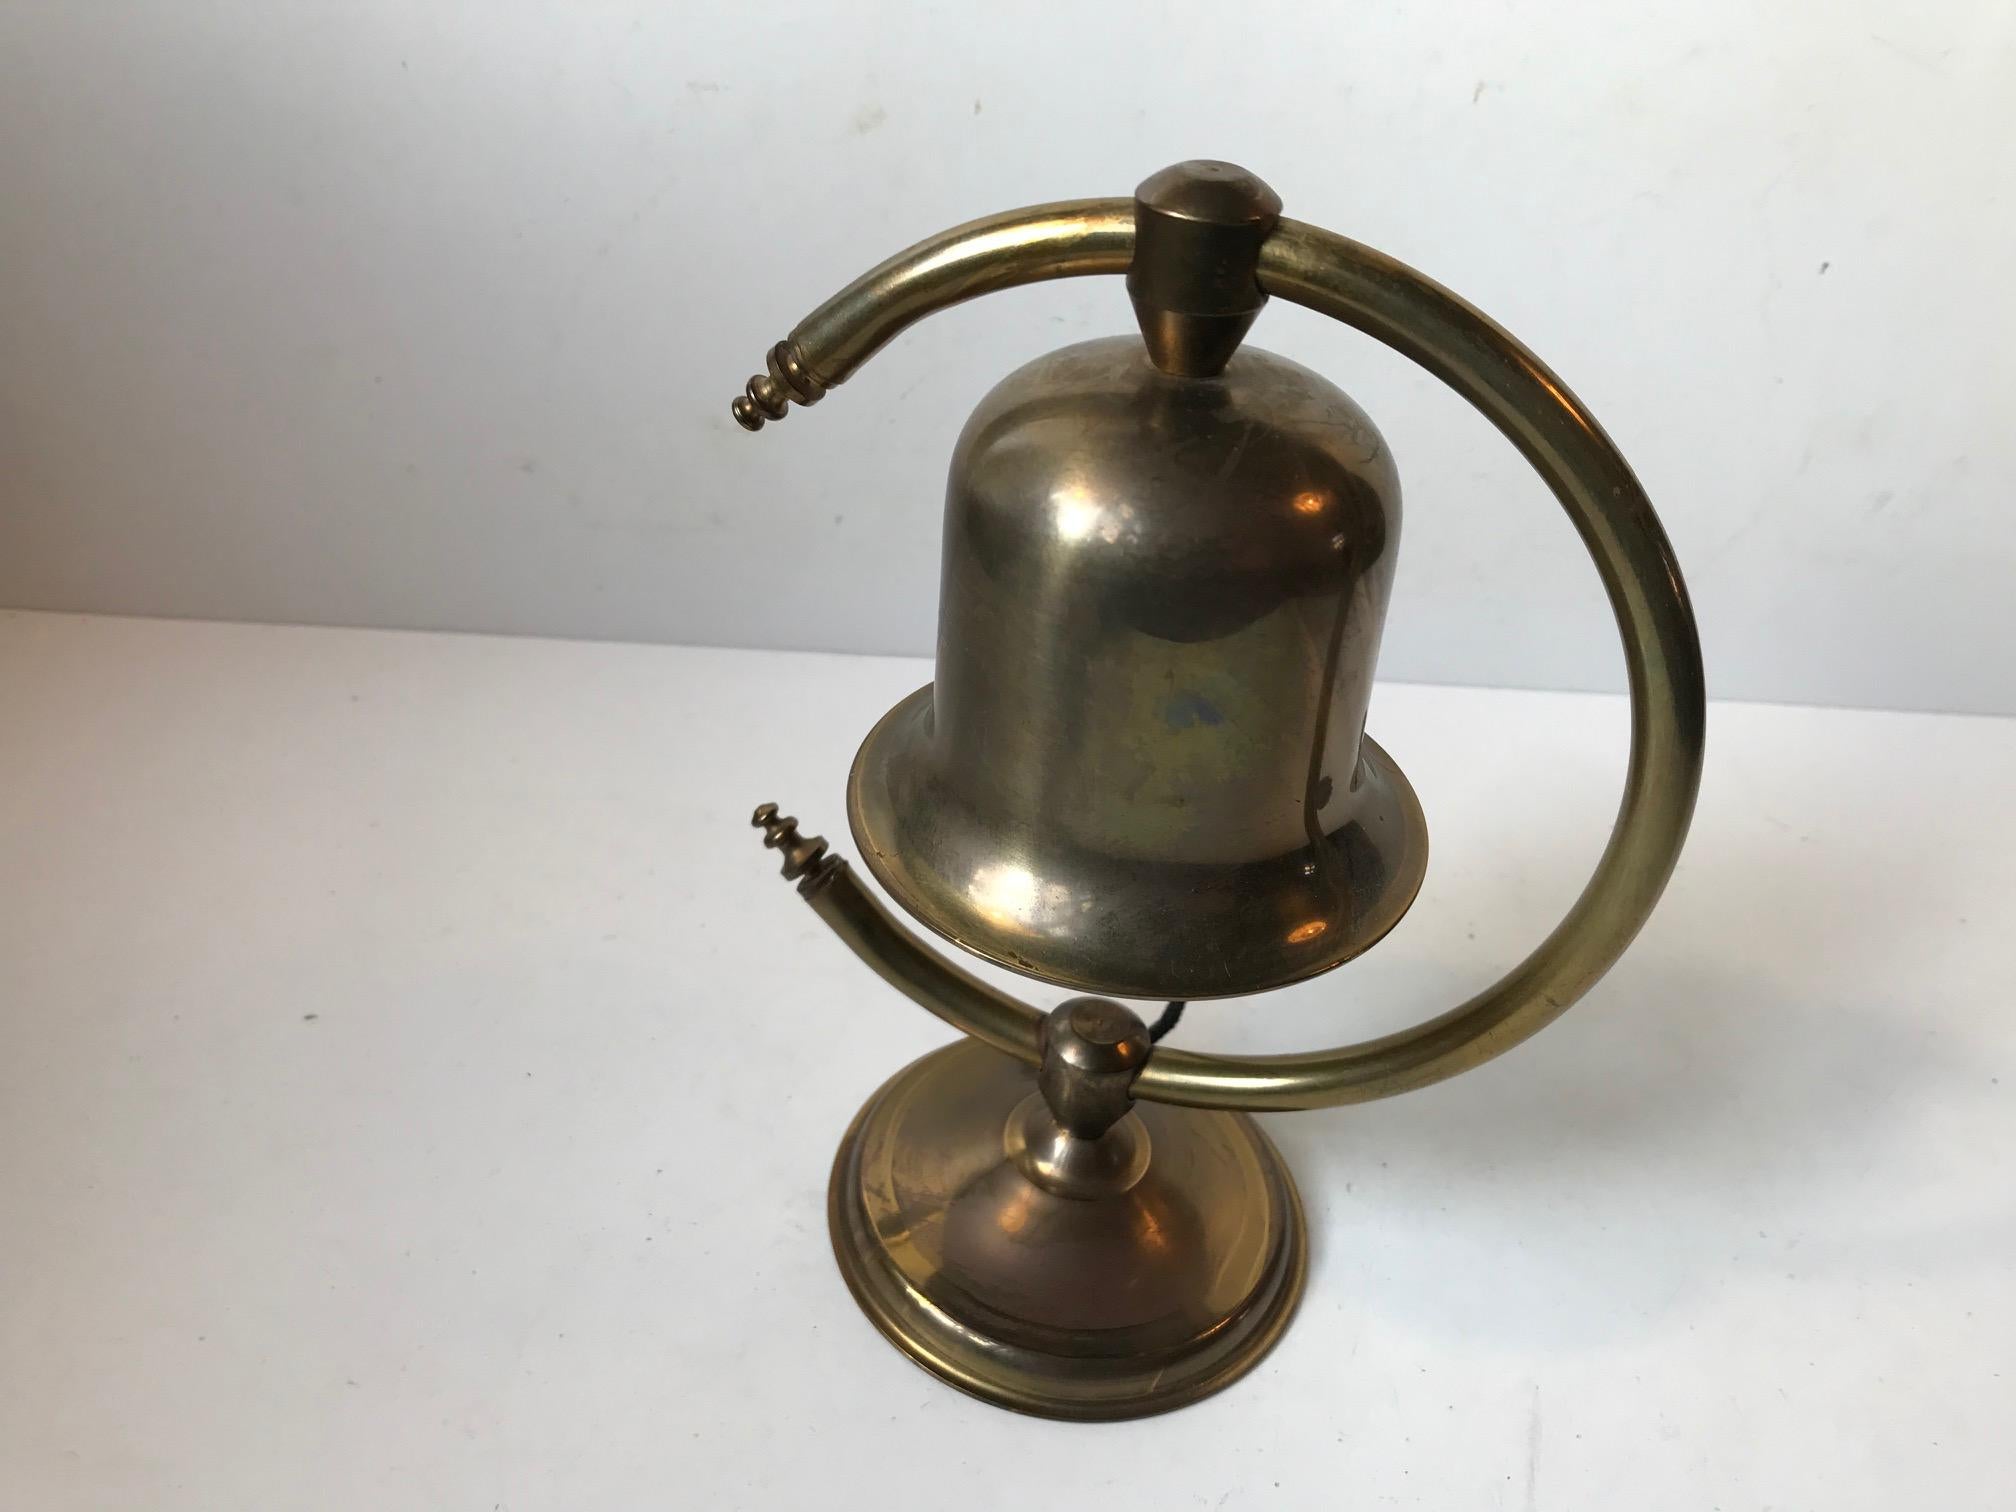 Unusual arched table or desk bell in brass. Designed and manufactured by Cawa in Denmark during the 1960s. Makers mark beneath its base.